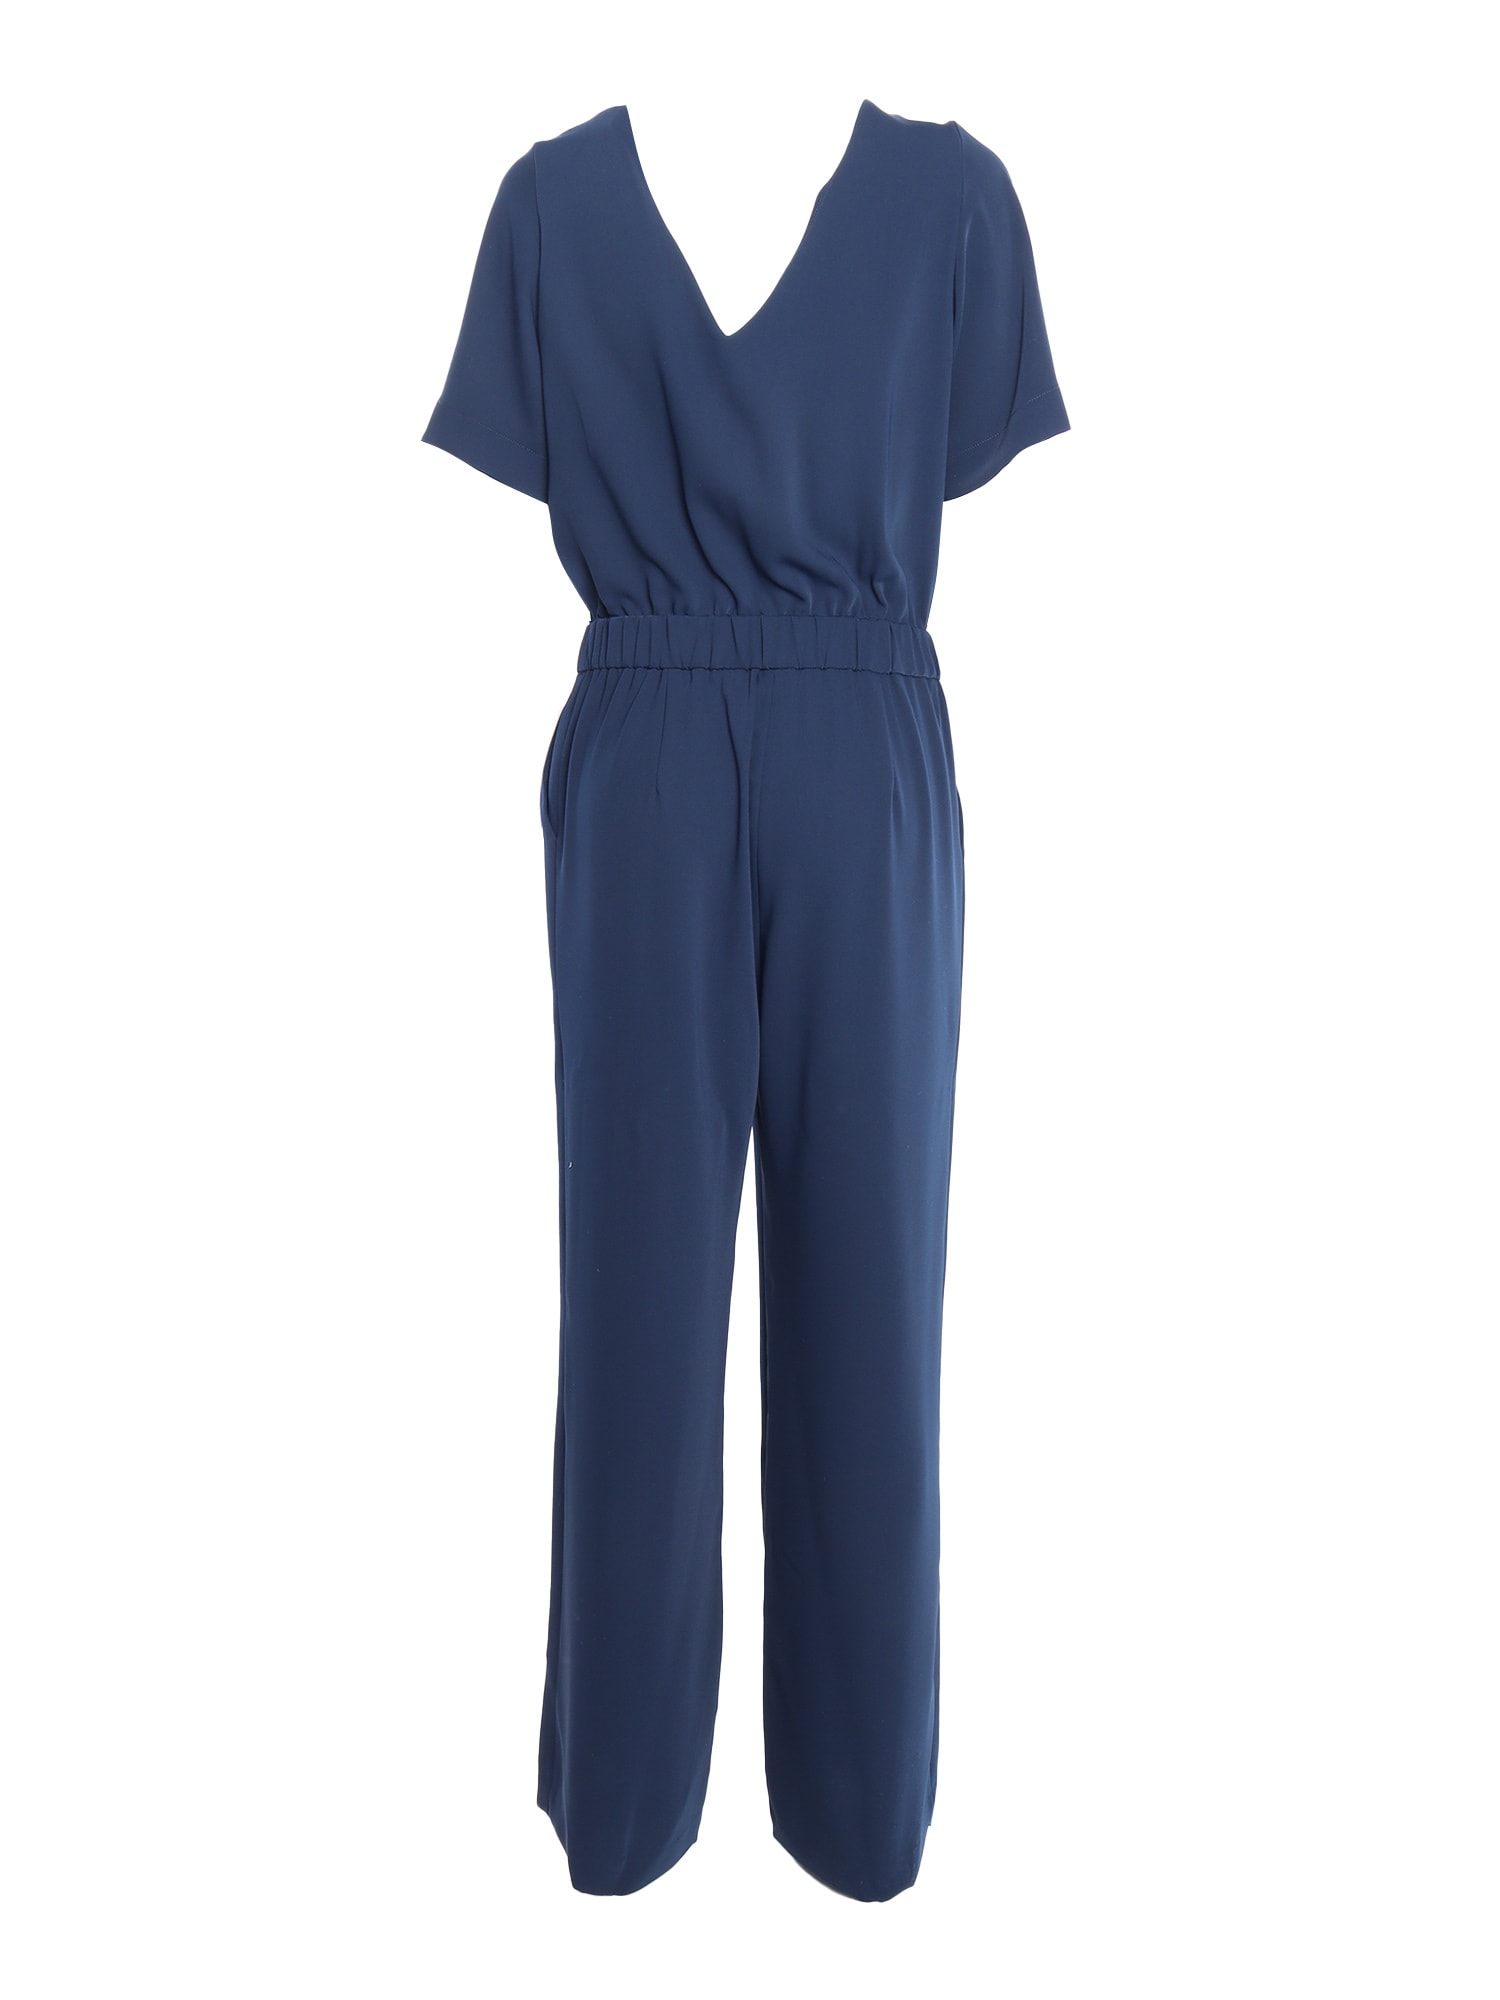 P.A.R.O.S.H. FULL JUMPSUIT 